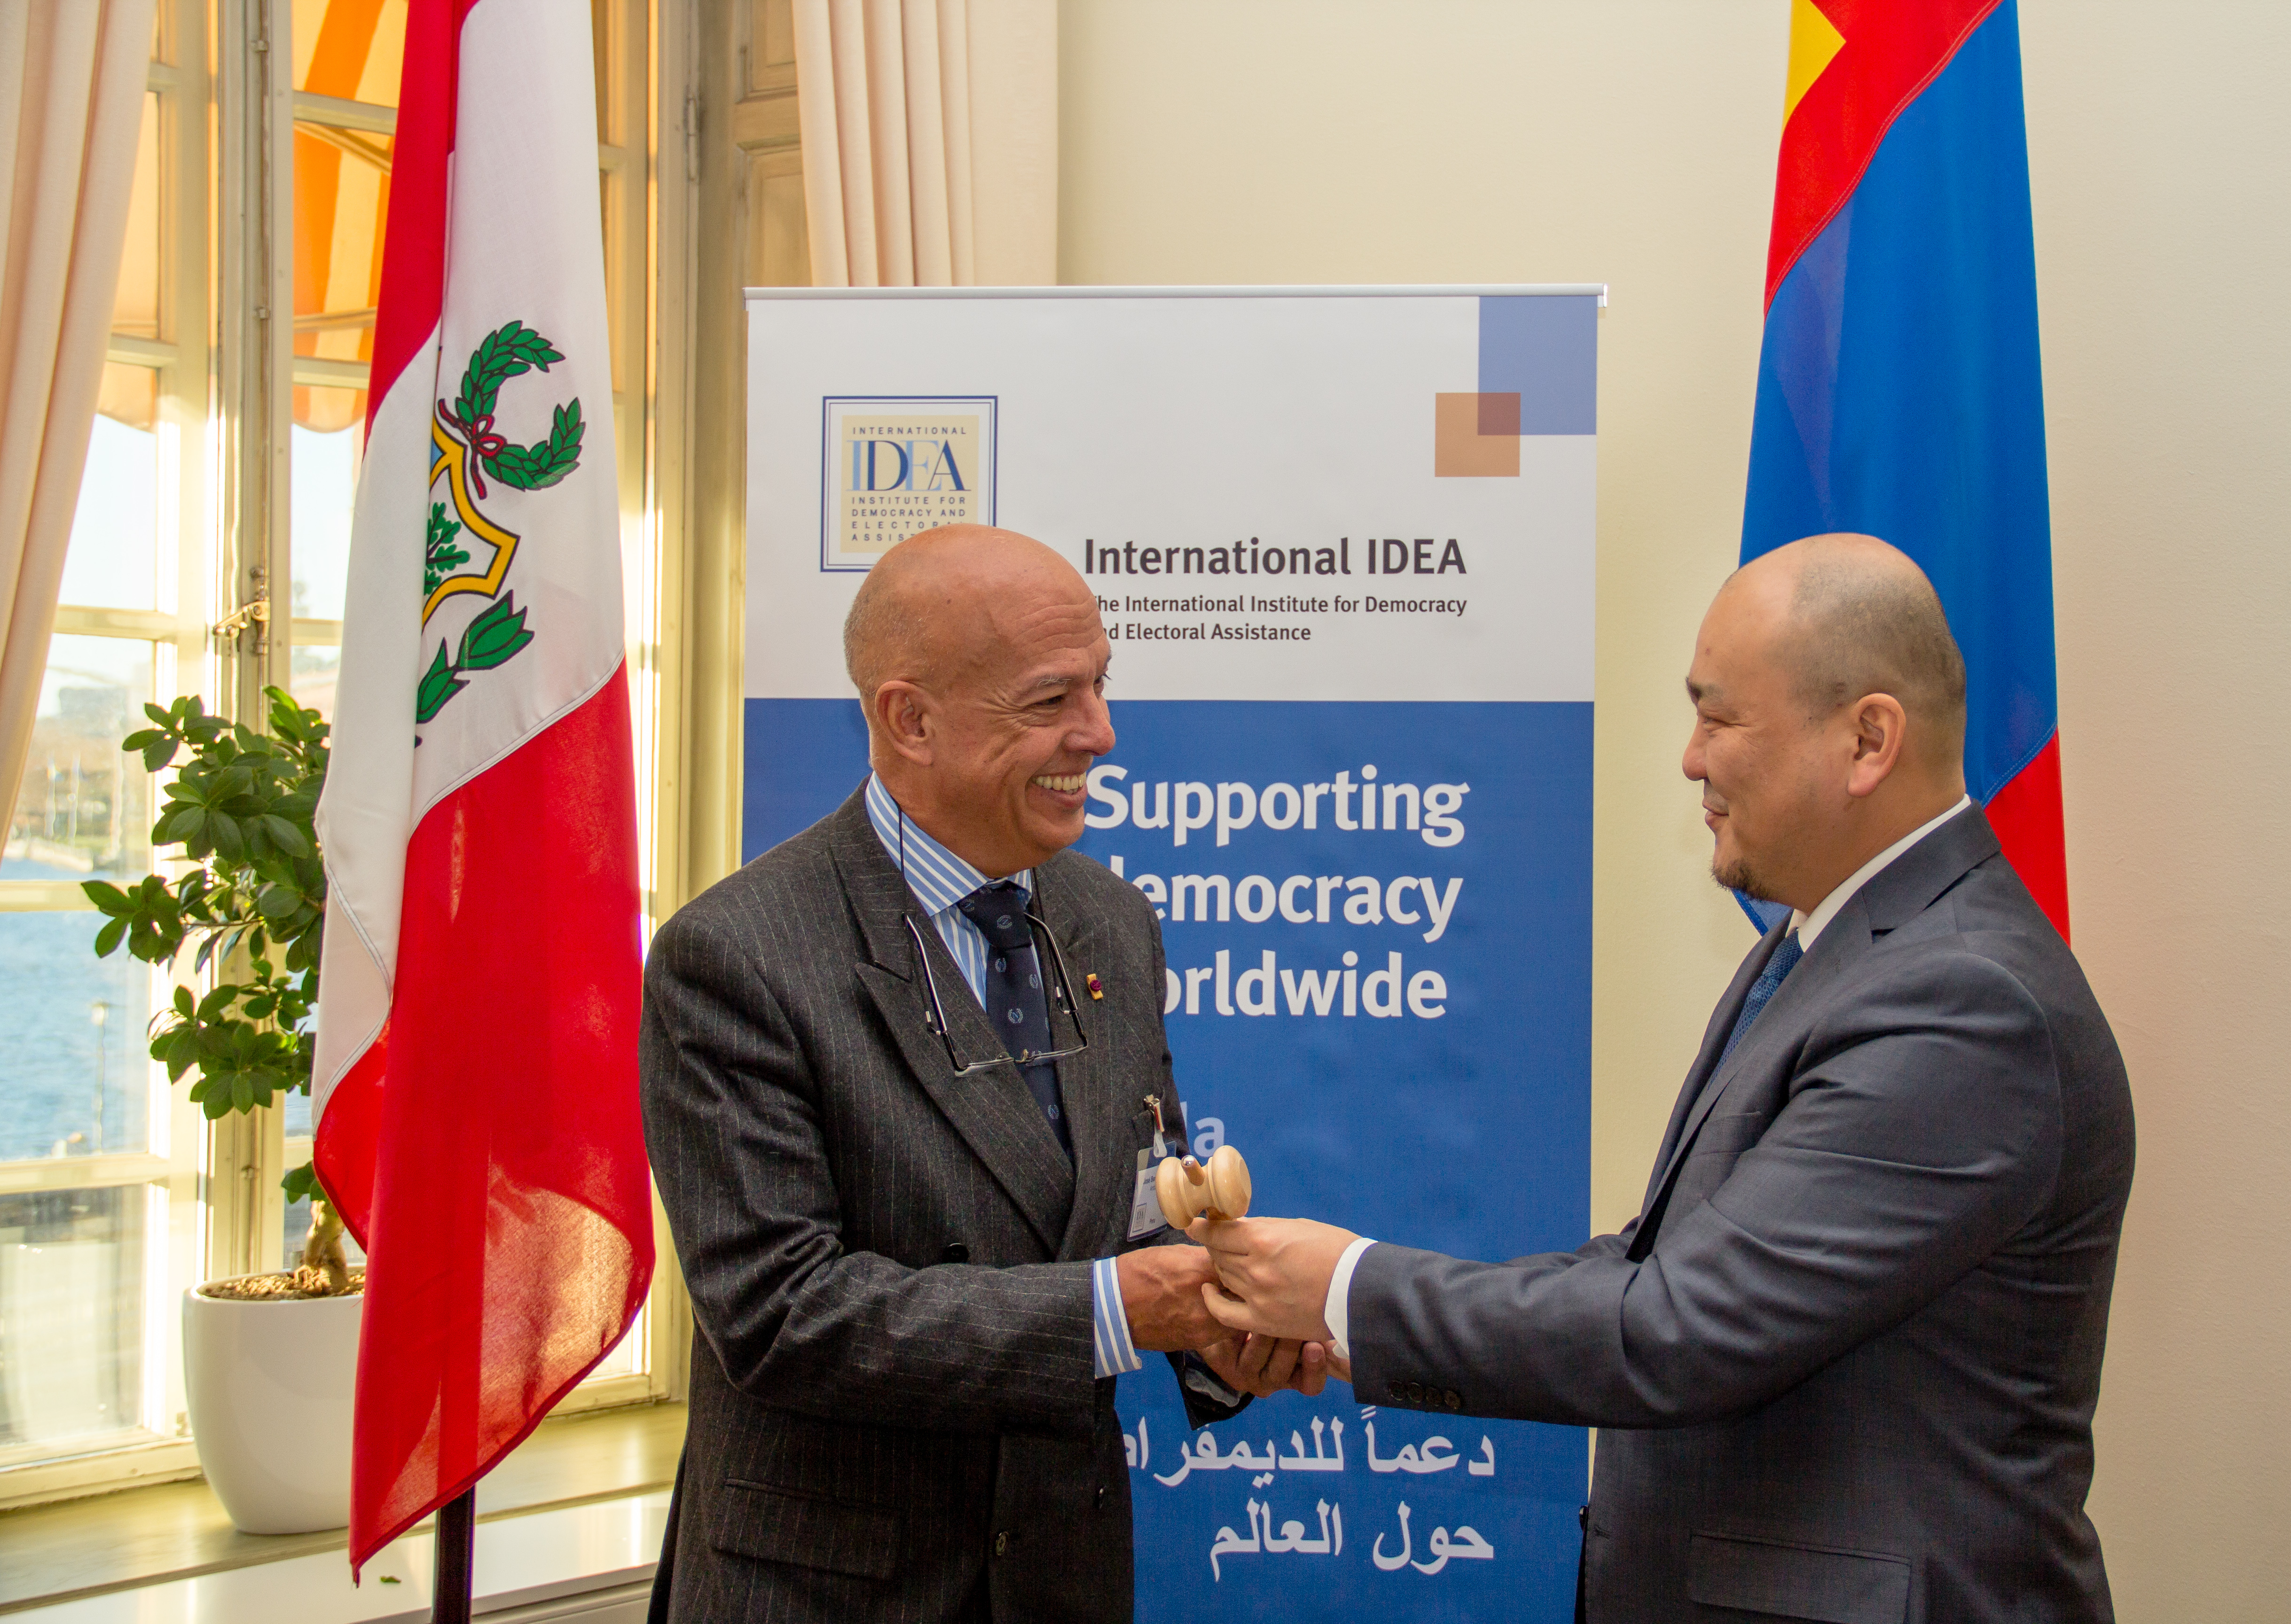 Mongolia hands over the Chairship of International IDEA to Peru for 2017